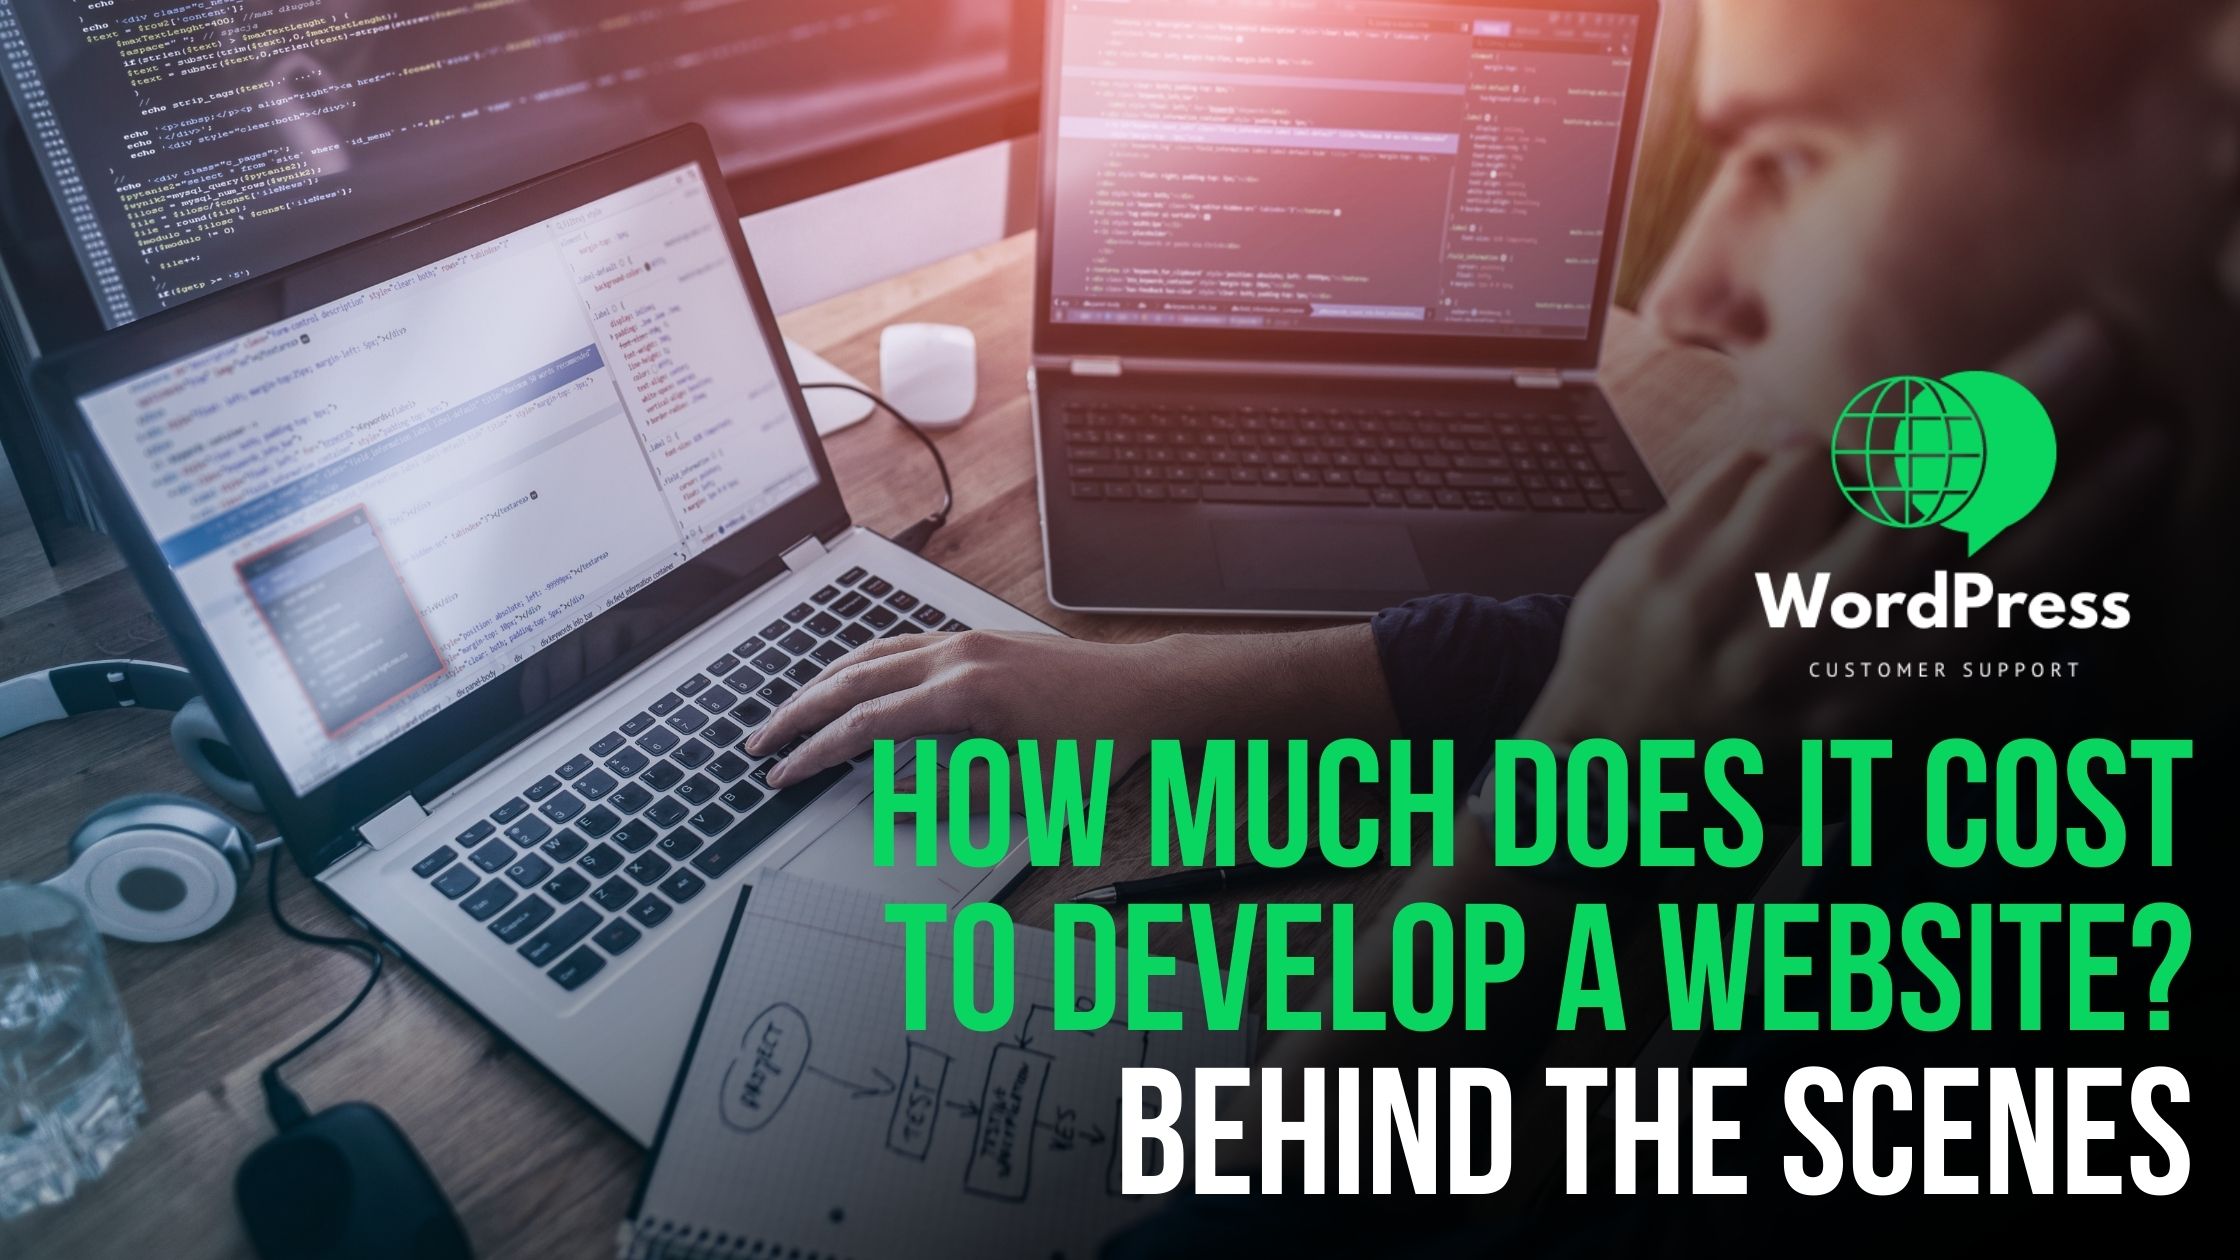 How Much Does it Cost to Develop a Website? Behind the Scenes